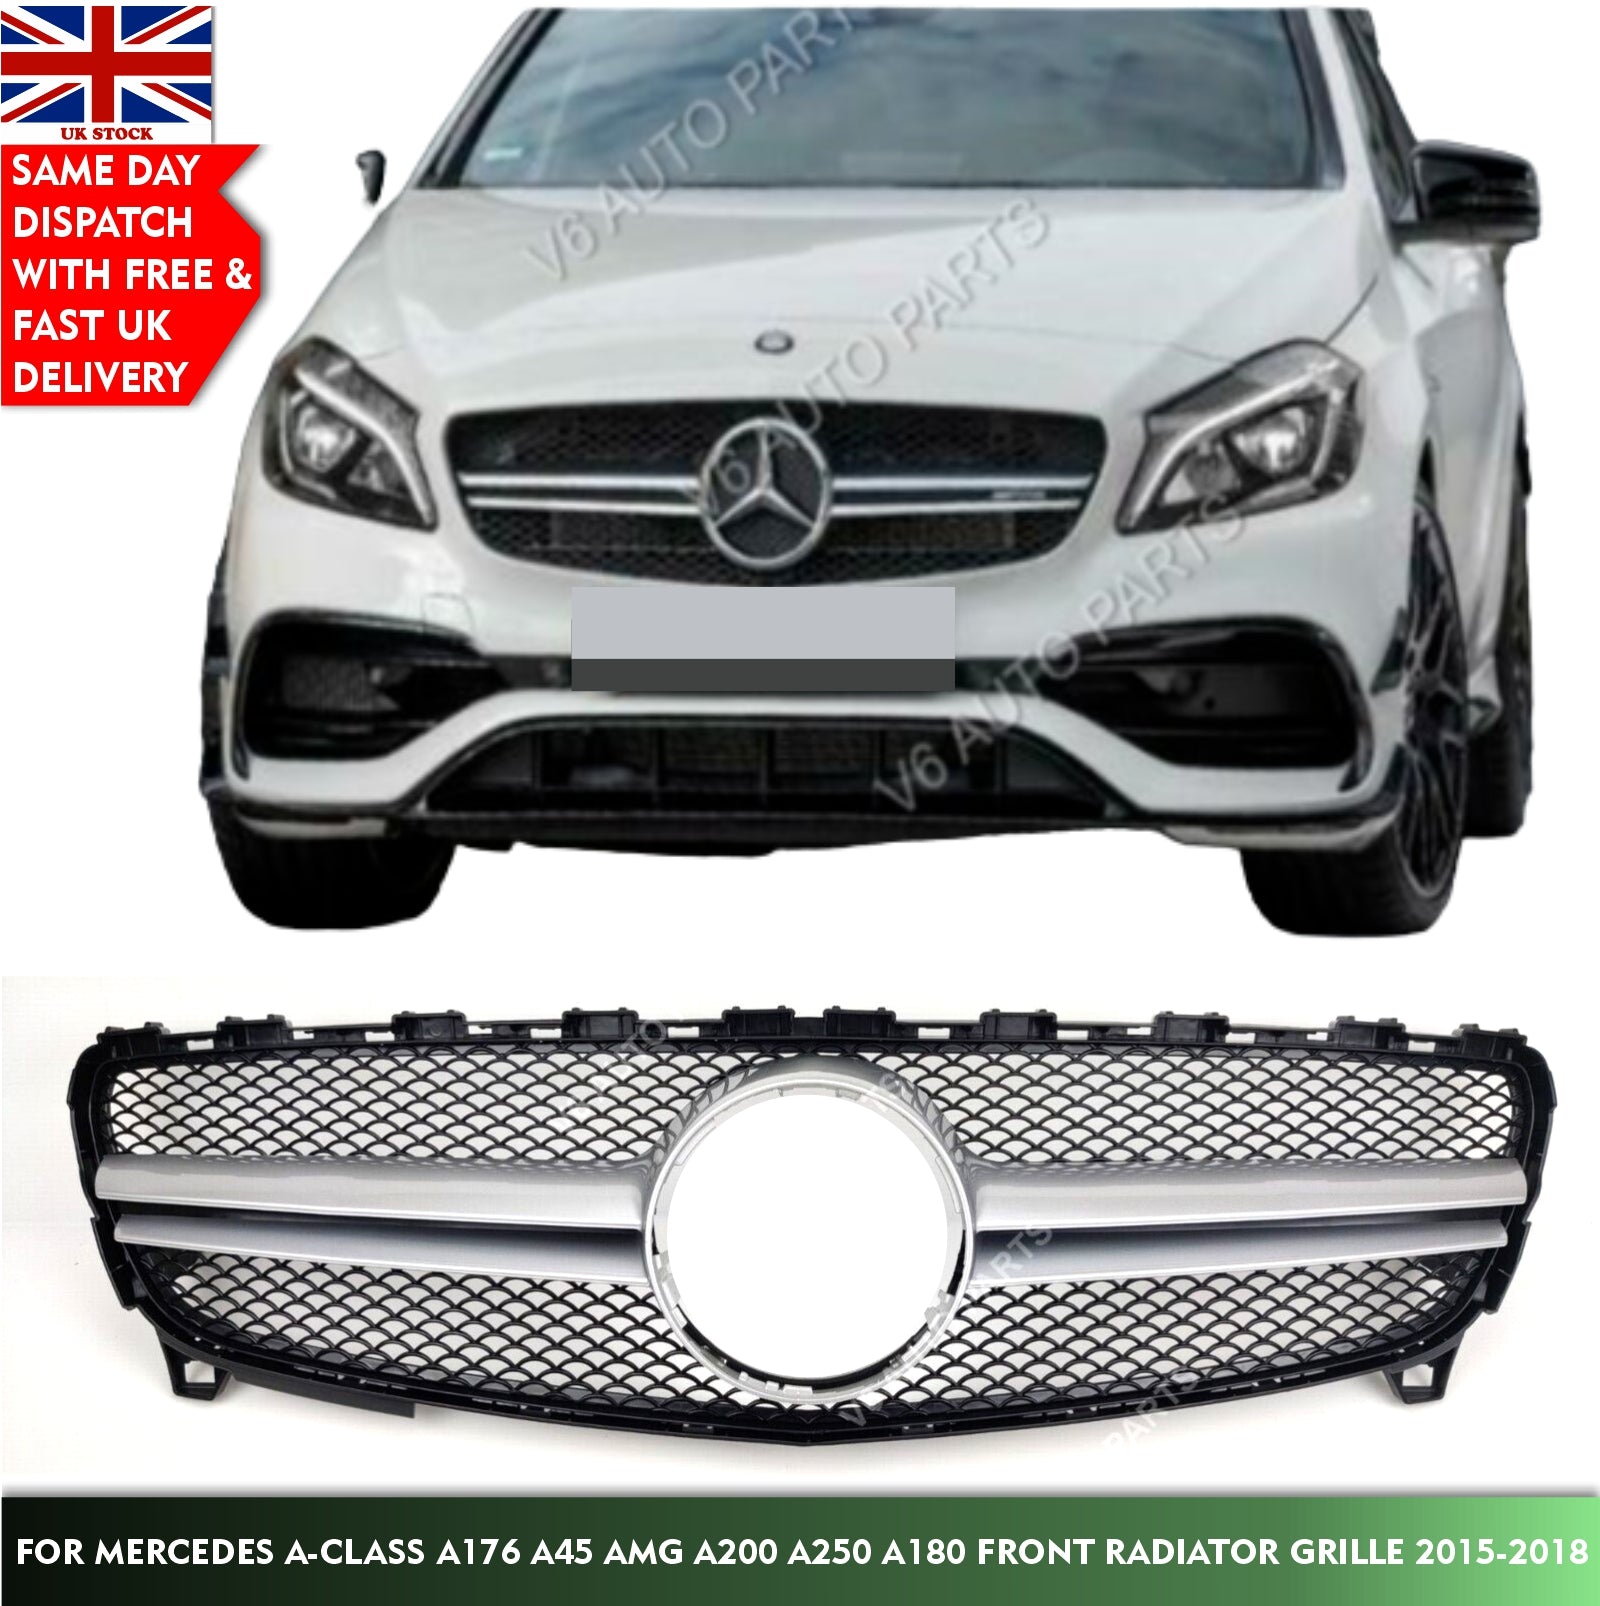 For Mercedes A-Class A176 A200 A250 A220 AMG A45 Front Radiator Grille 2015-2018